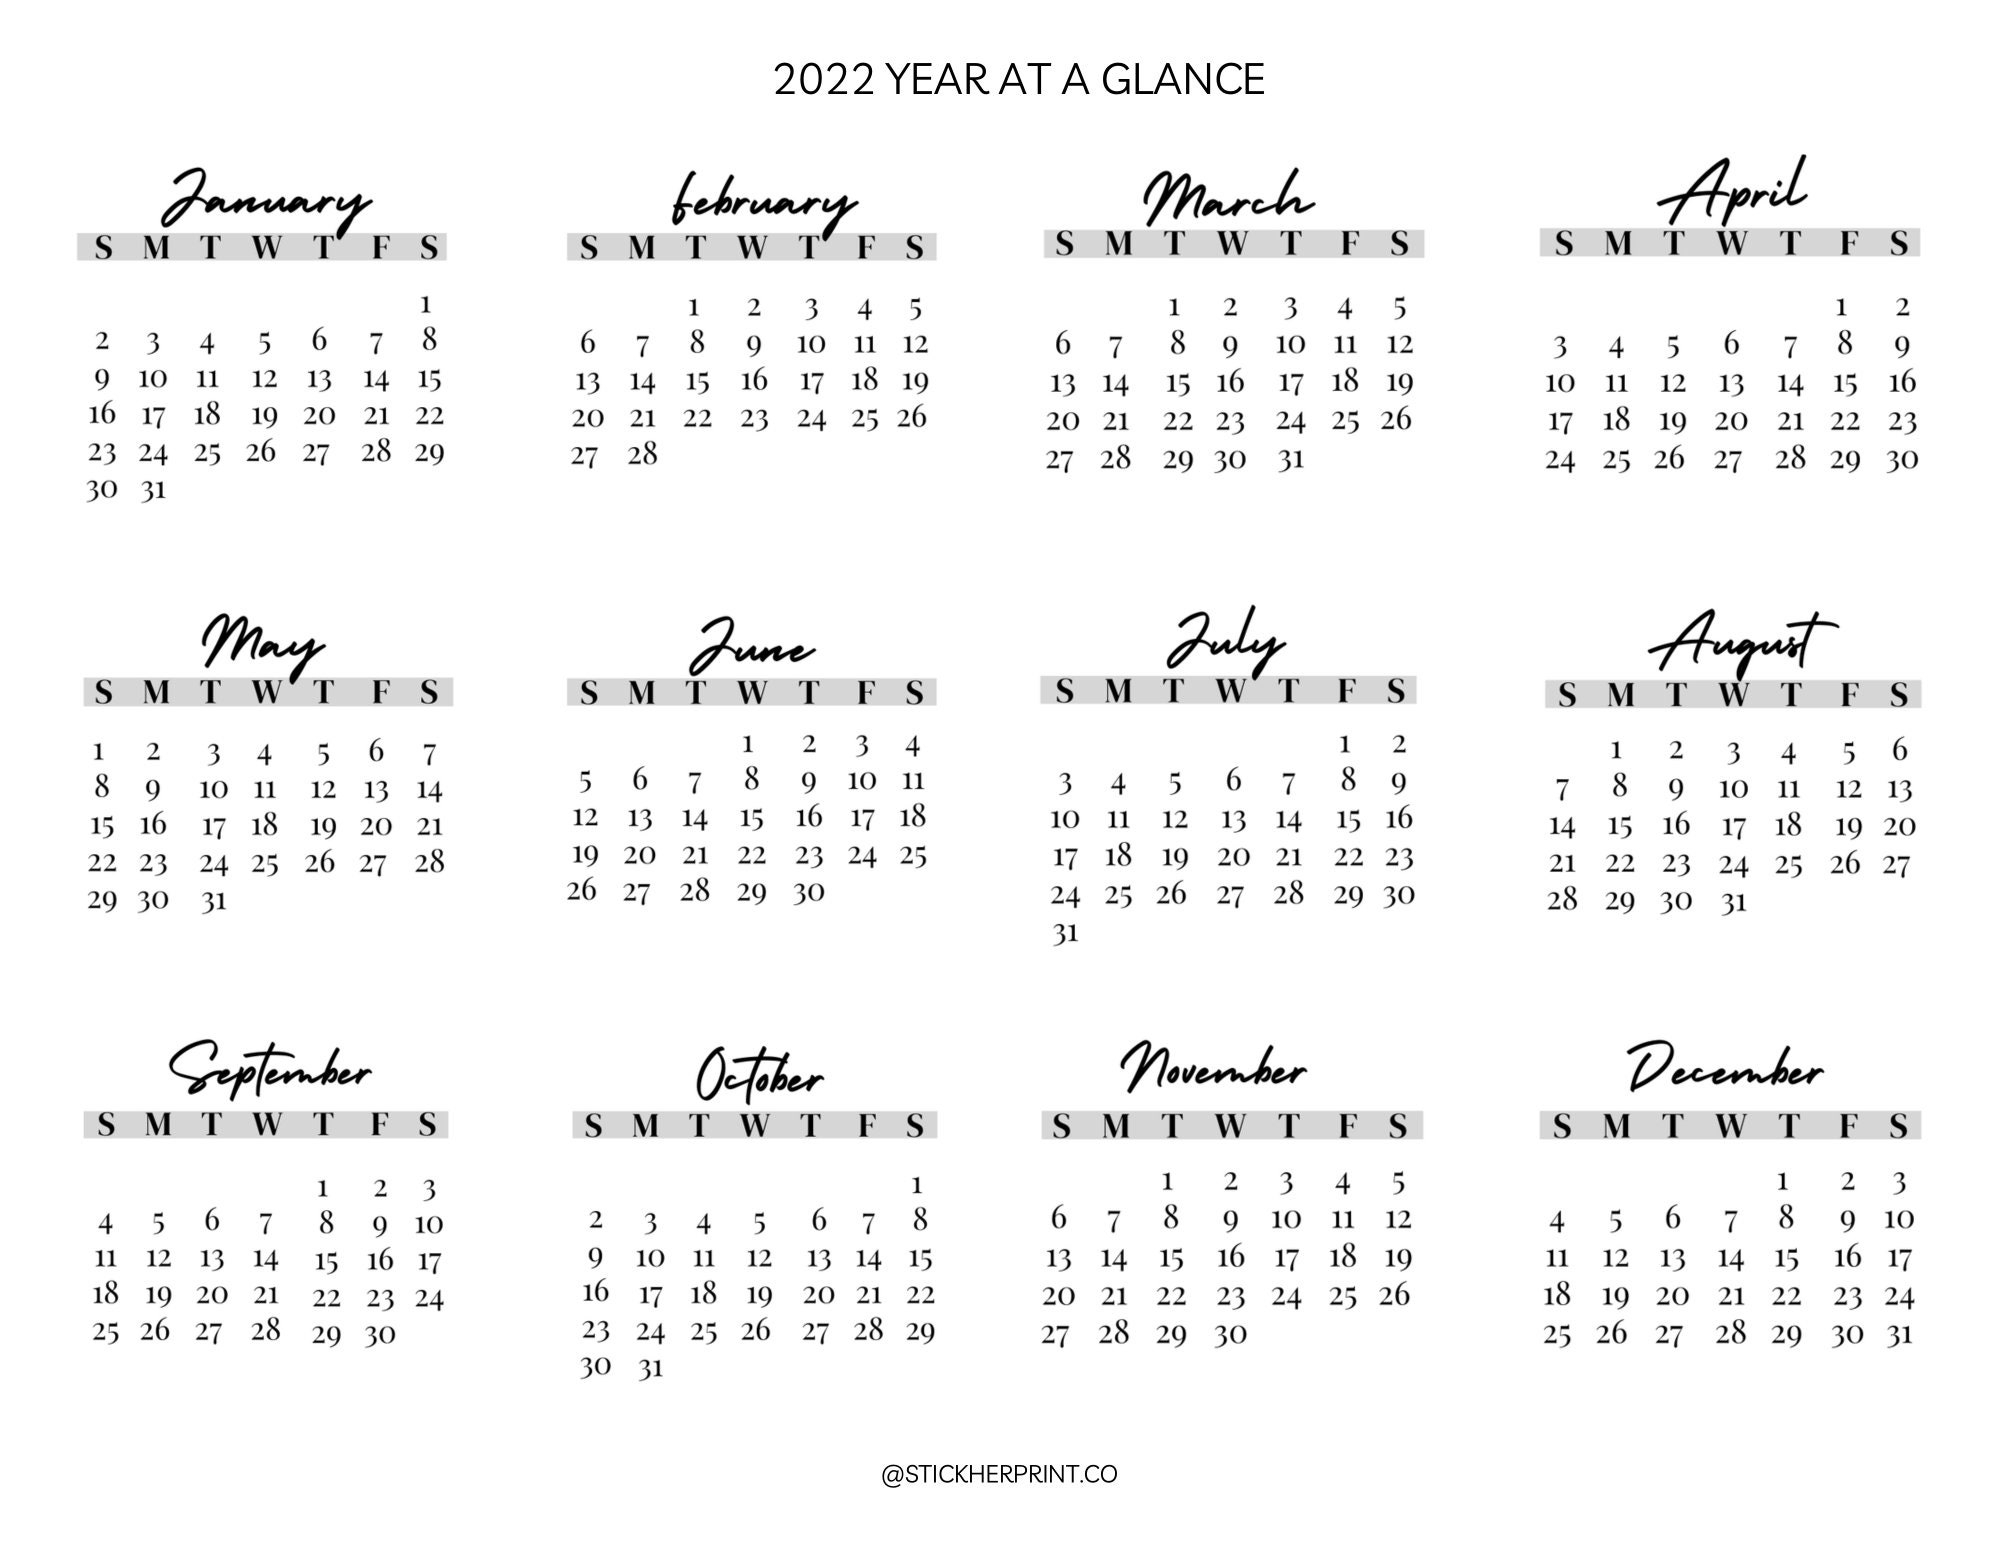 2021 2022 Year At A Glance Yearly Calendar Printable Pdf | Etsy within Year At A Glance Calendar 2022